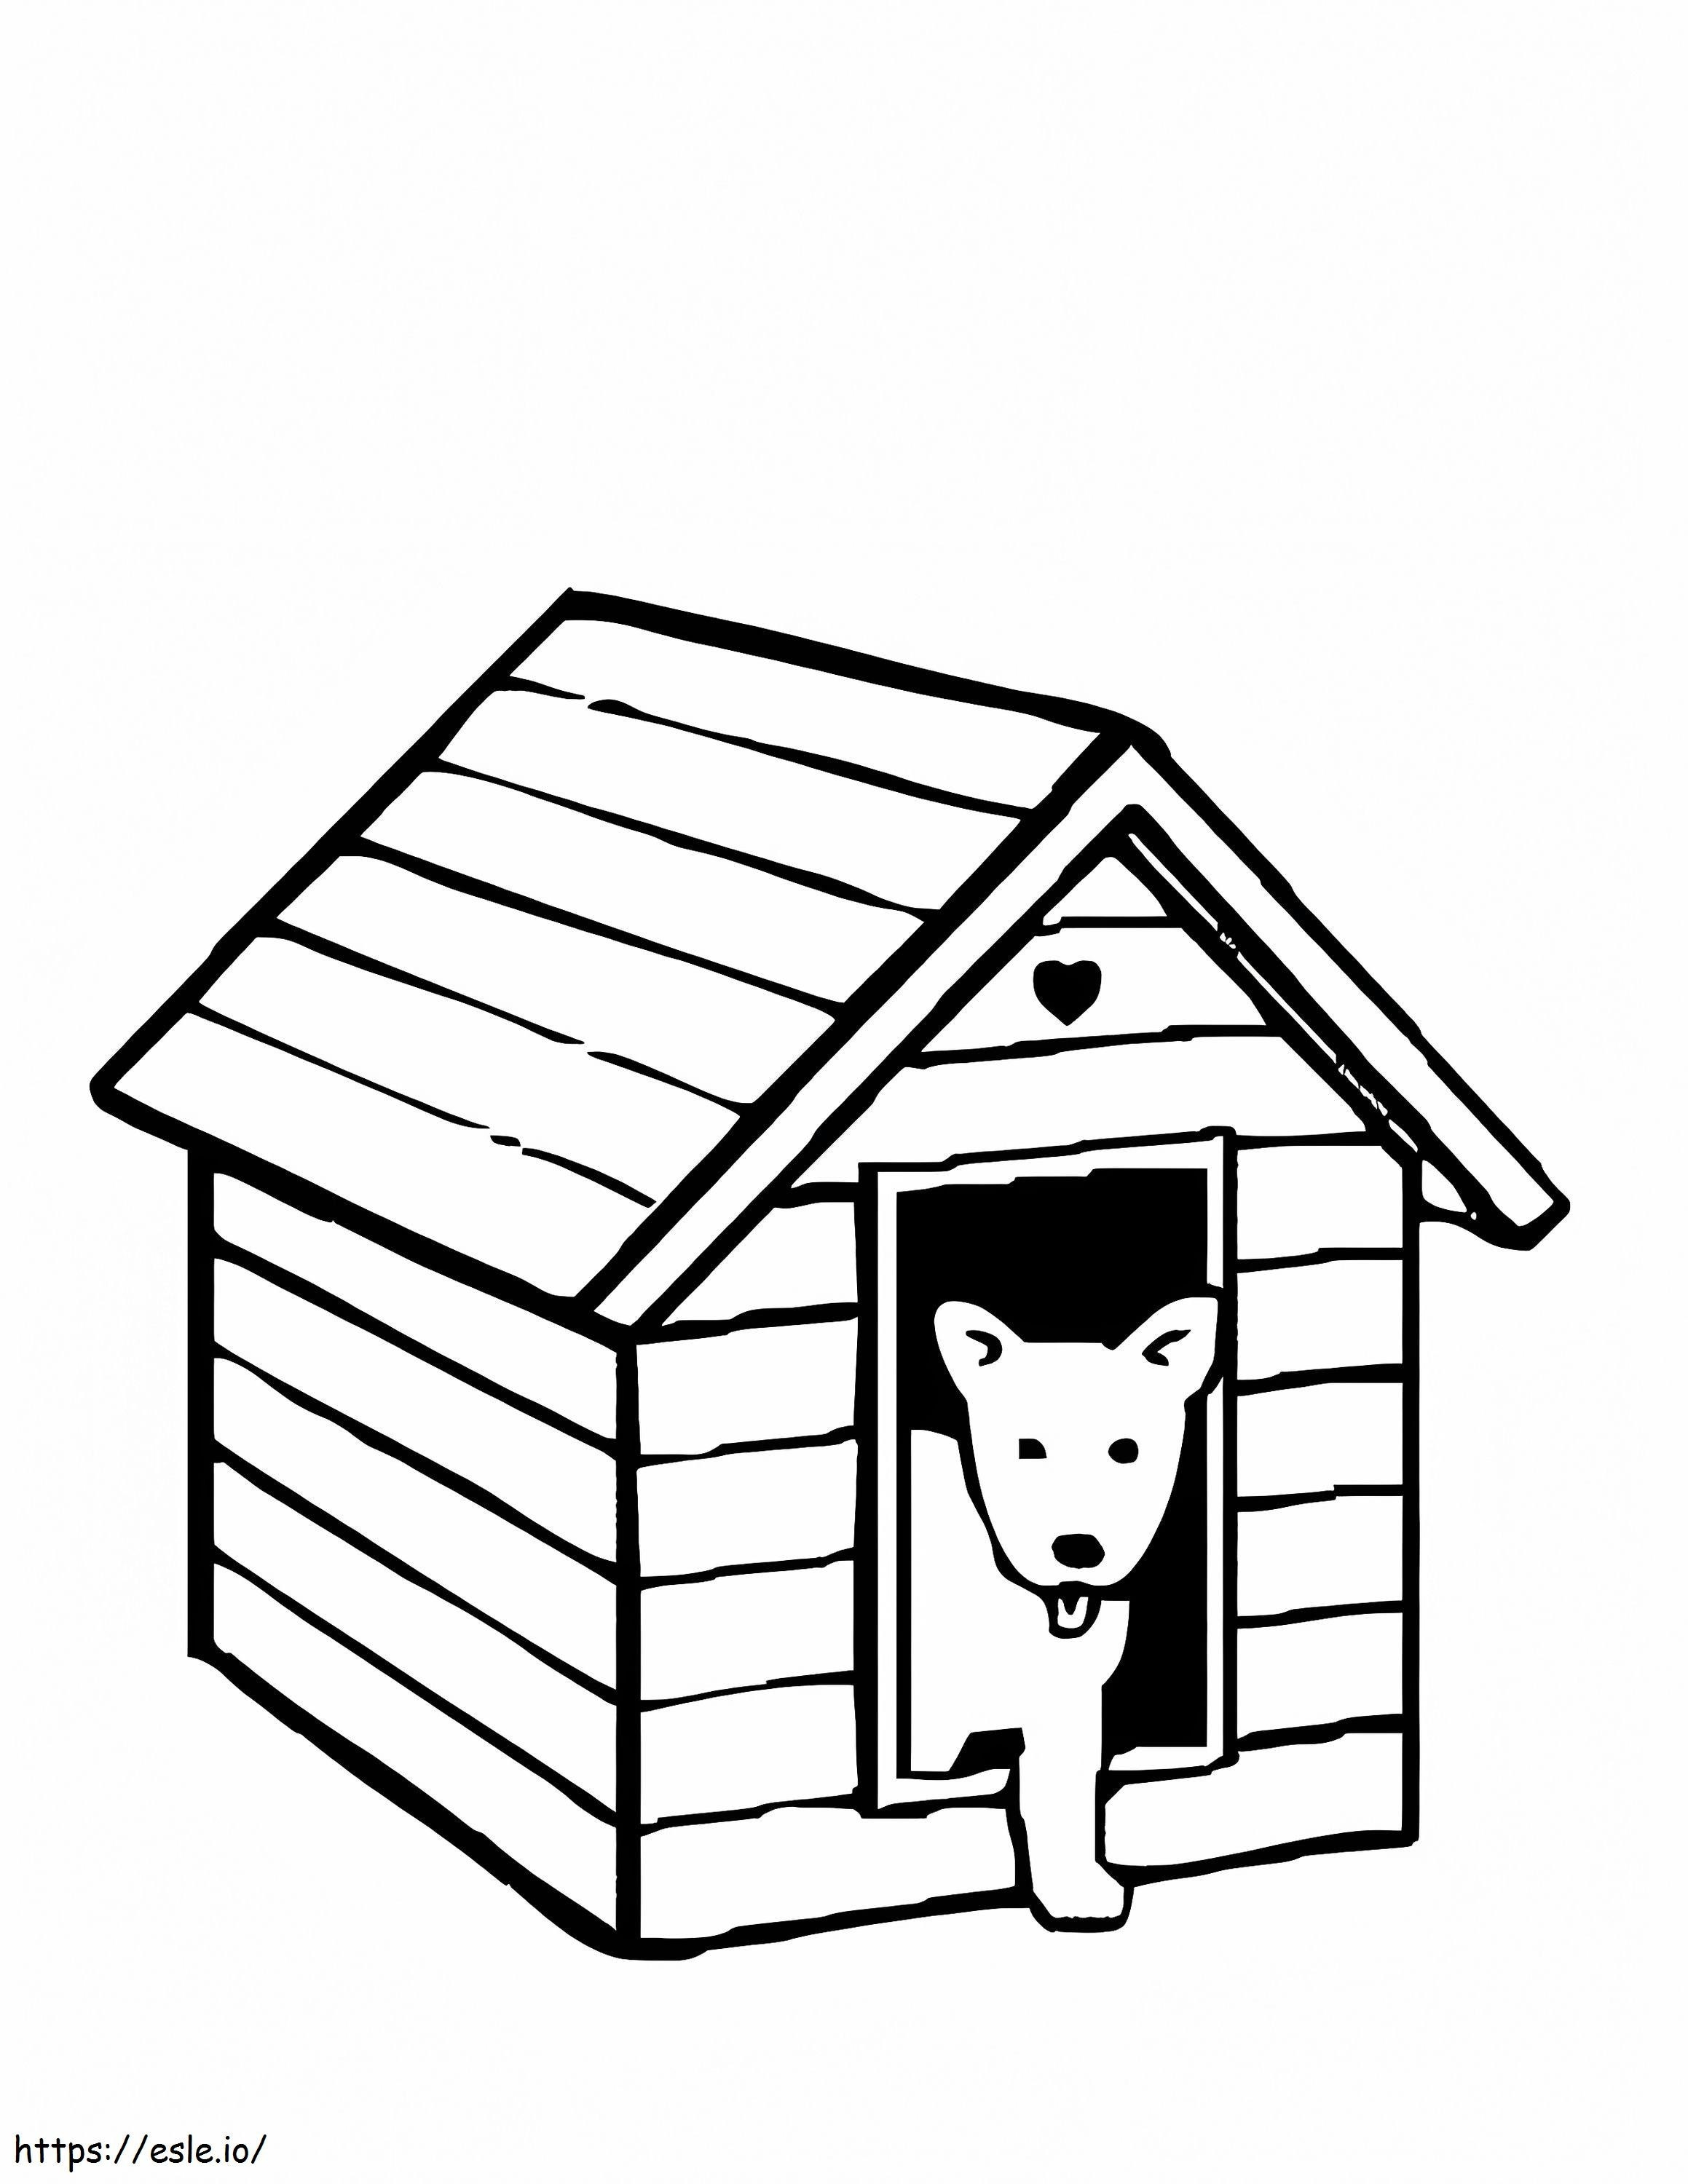 Cute Dog House coloring page